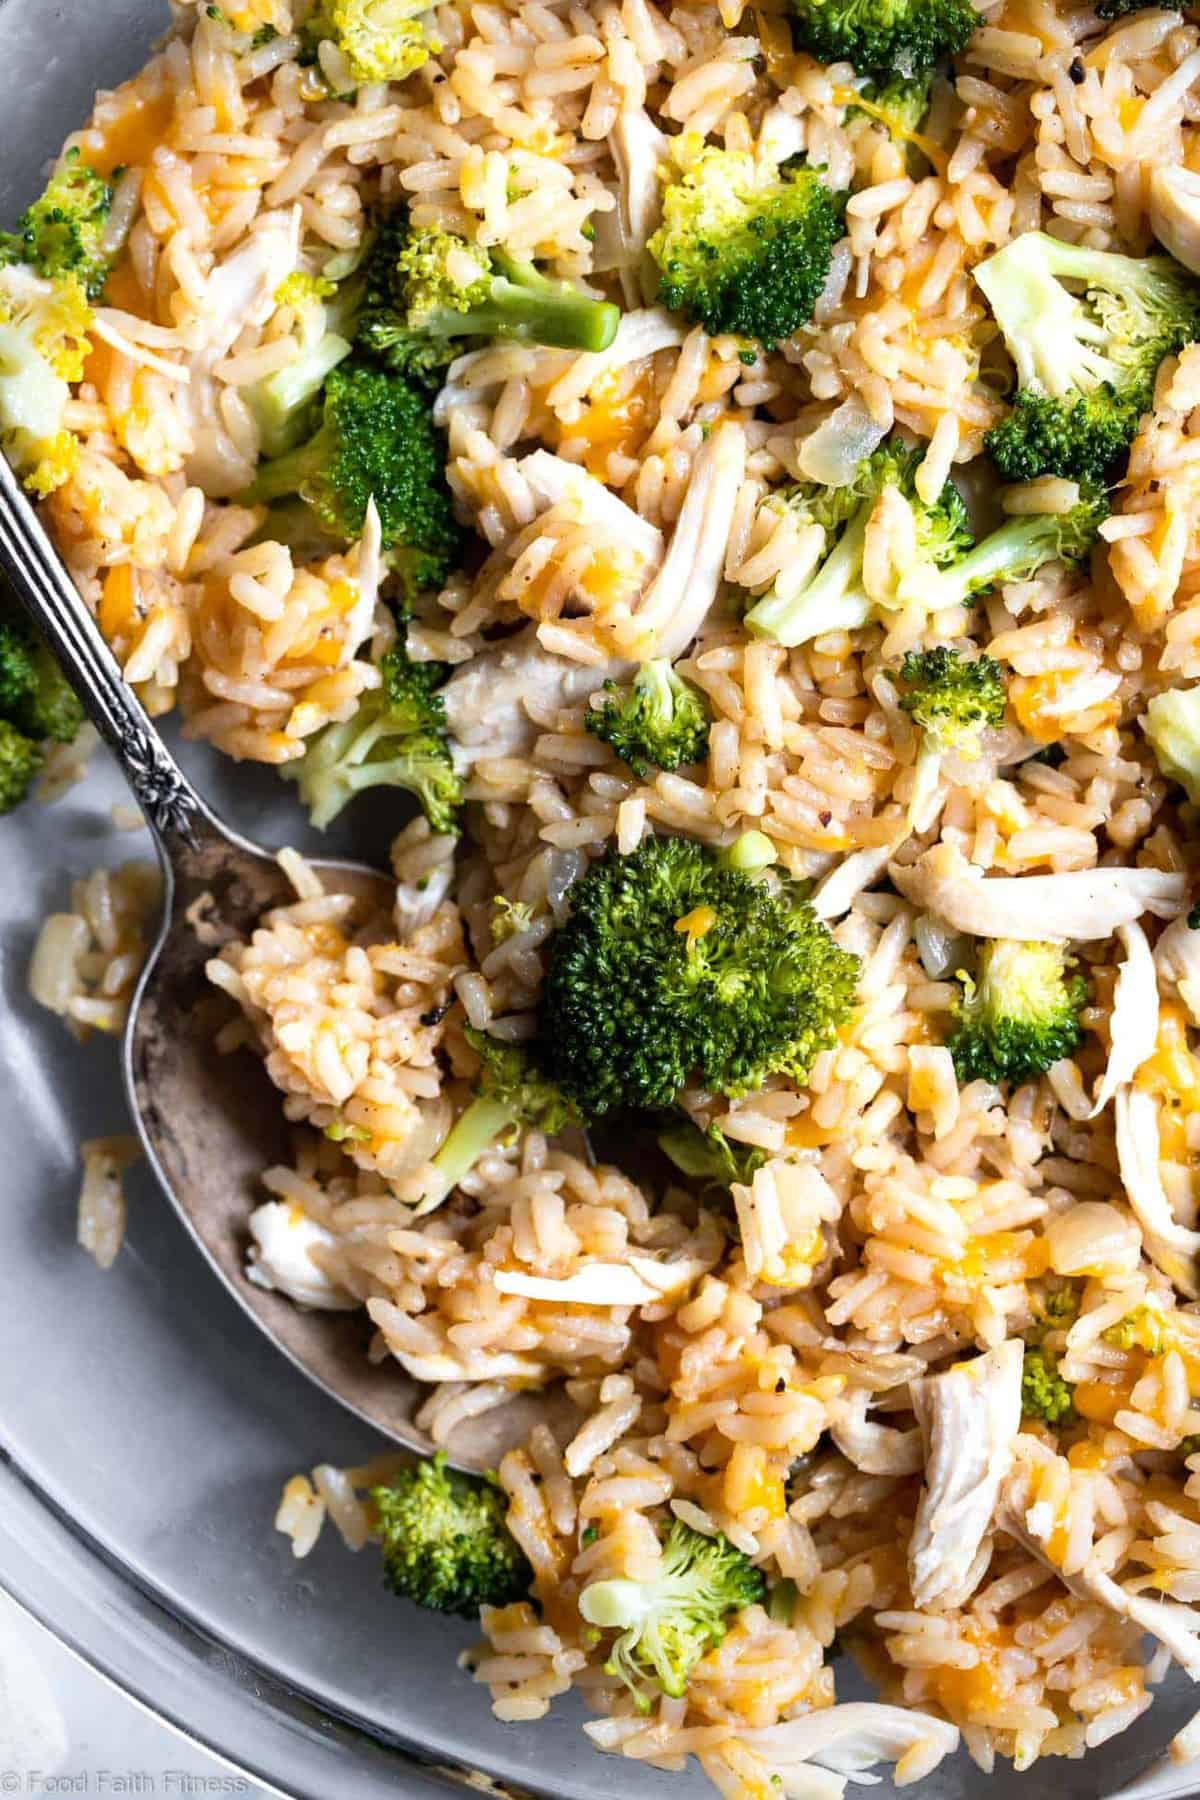 Instant Pot Broccoli Cheese and Chicken Rice Casserole - This gluten free Instant Pot chicken and rice casserole with broccoli is an easy, weeknight dinner that almost makes itself! Even picky kids will love it and great for meal prep! | #Foodfaithfitness | #healthy #glutenfree #Instantpot #dinner #kidfriendly